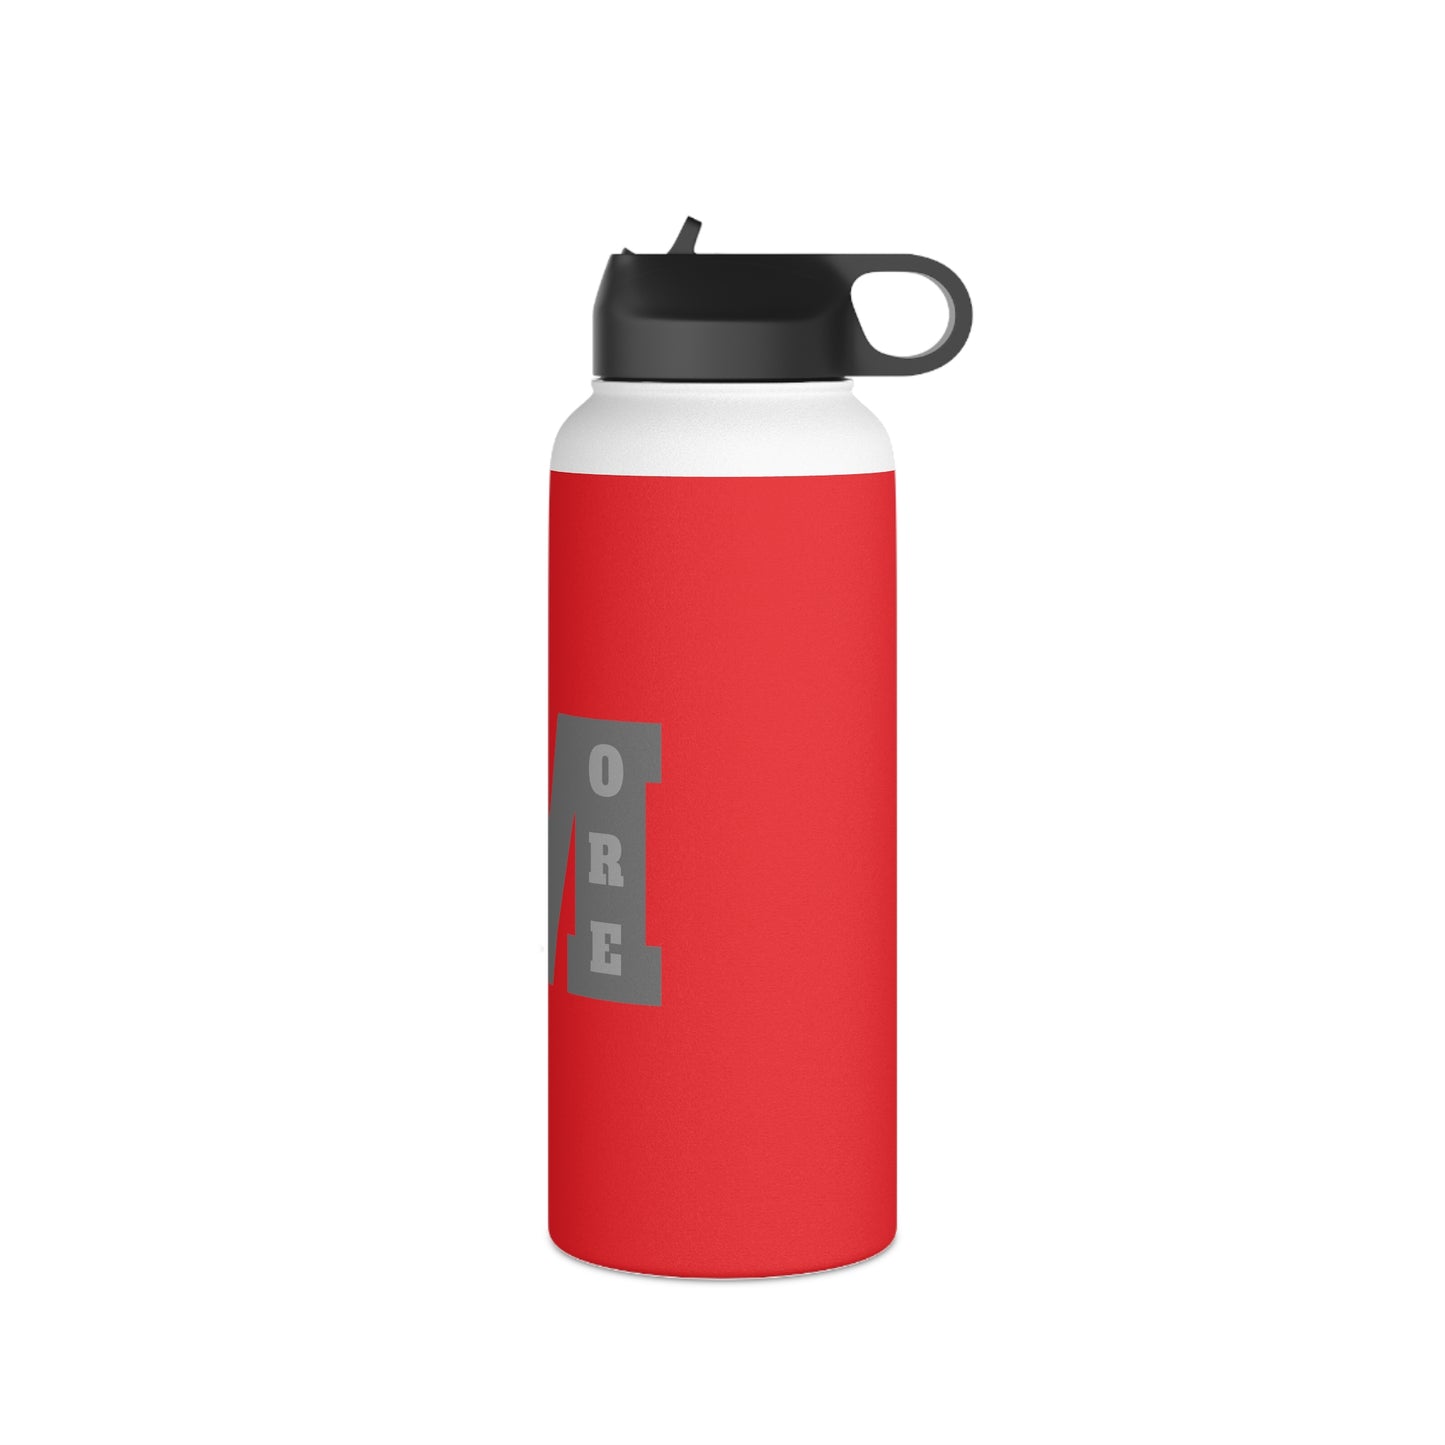 RED 1M STAINLESS STEEL WATER BOTTLE